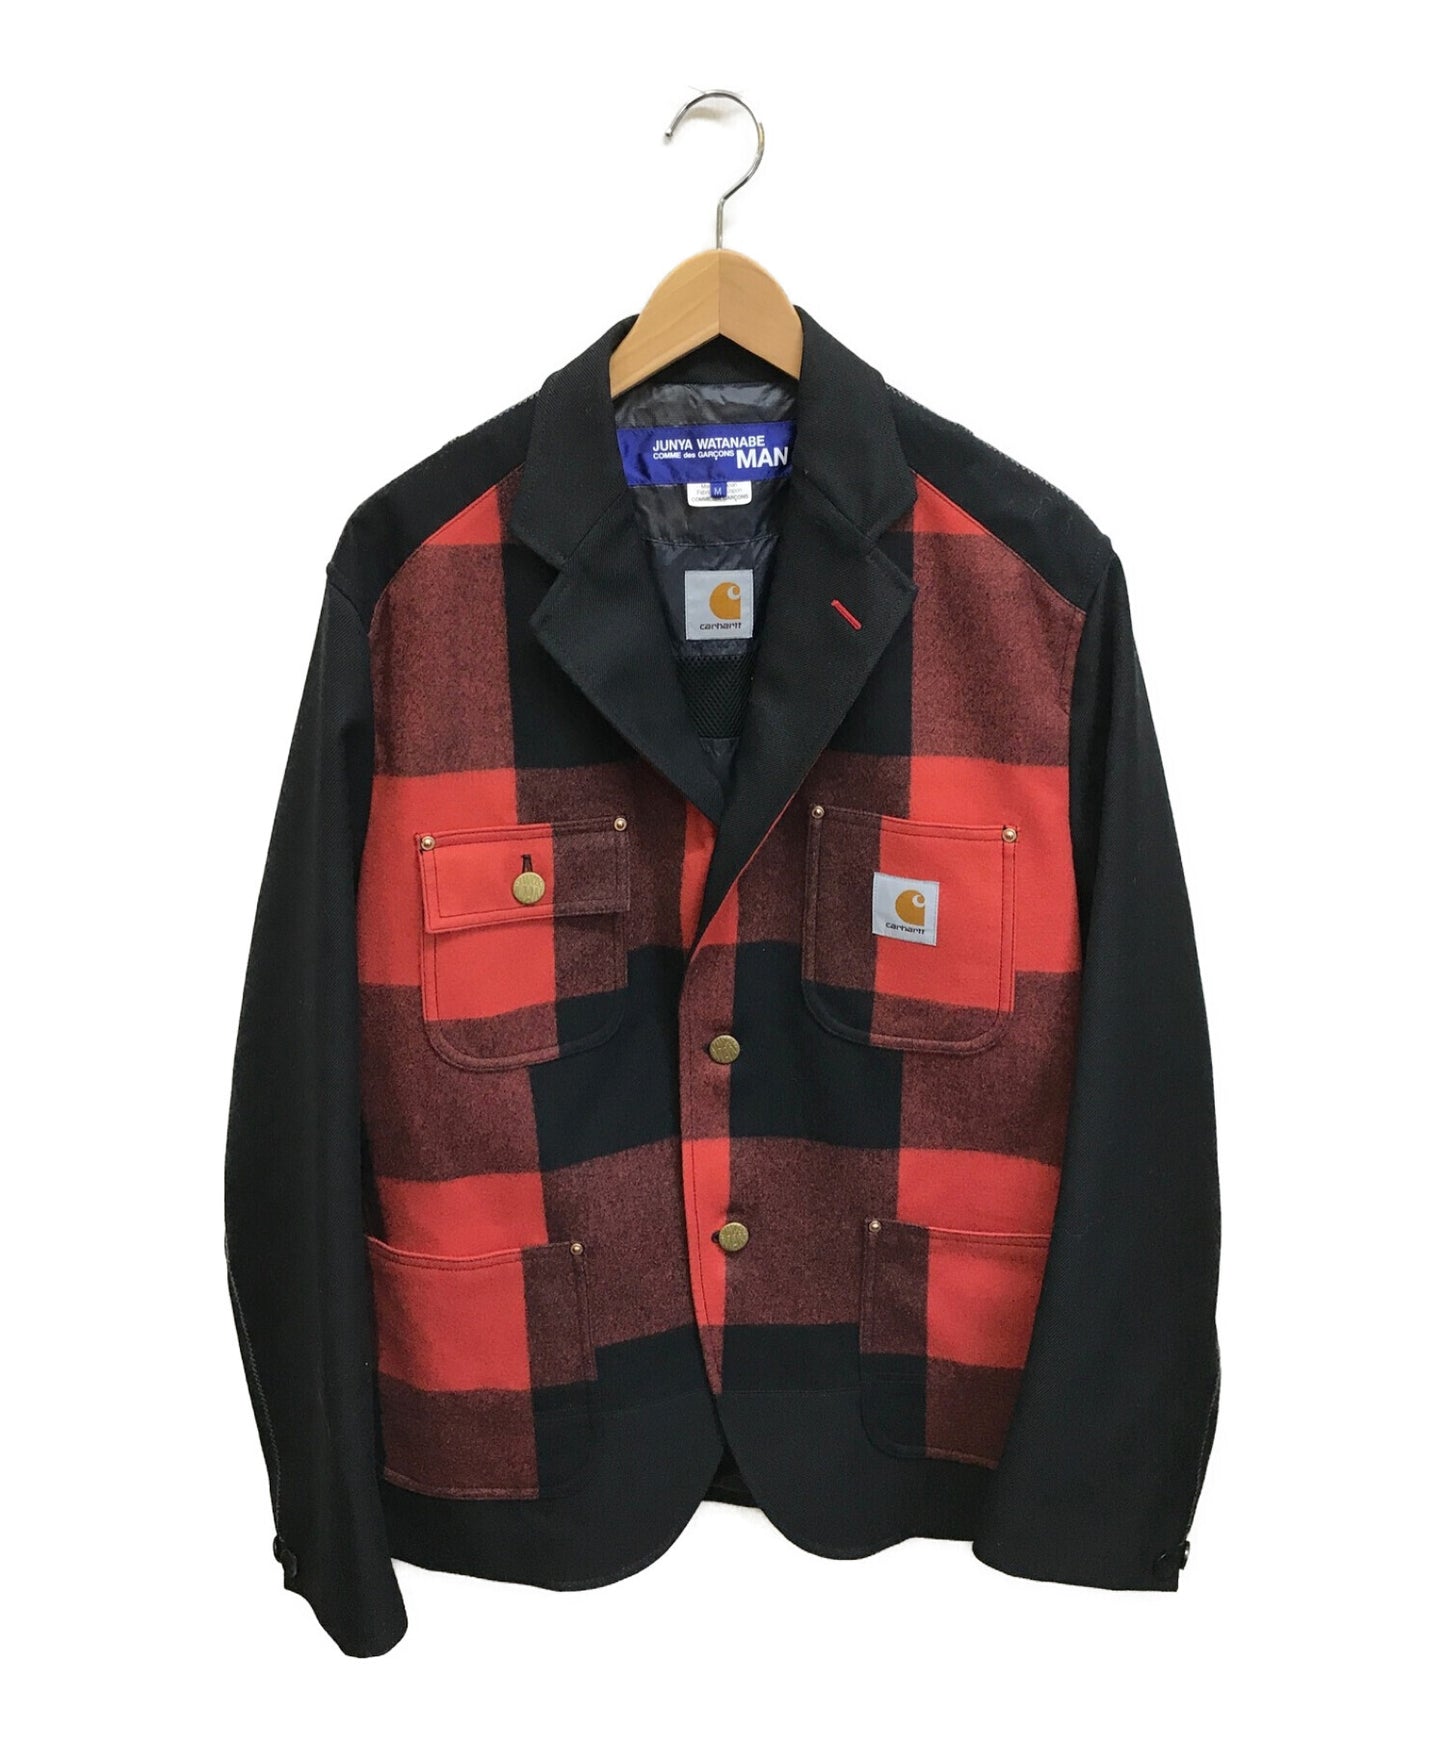 Comme des Garcons Junya Watanabe Man Wool Surge Duck-switched ตรวจสอบแจ็คเก็ต AD2021 WH-J006